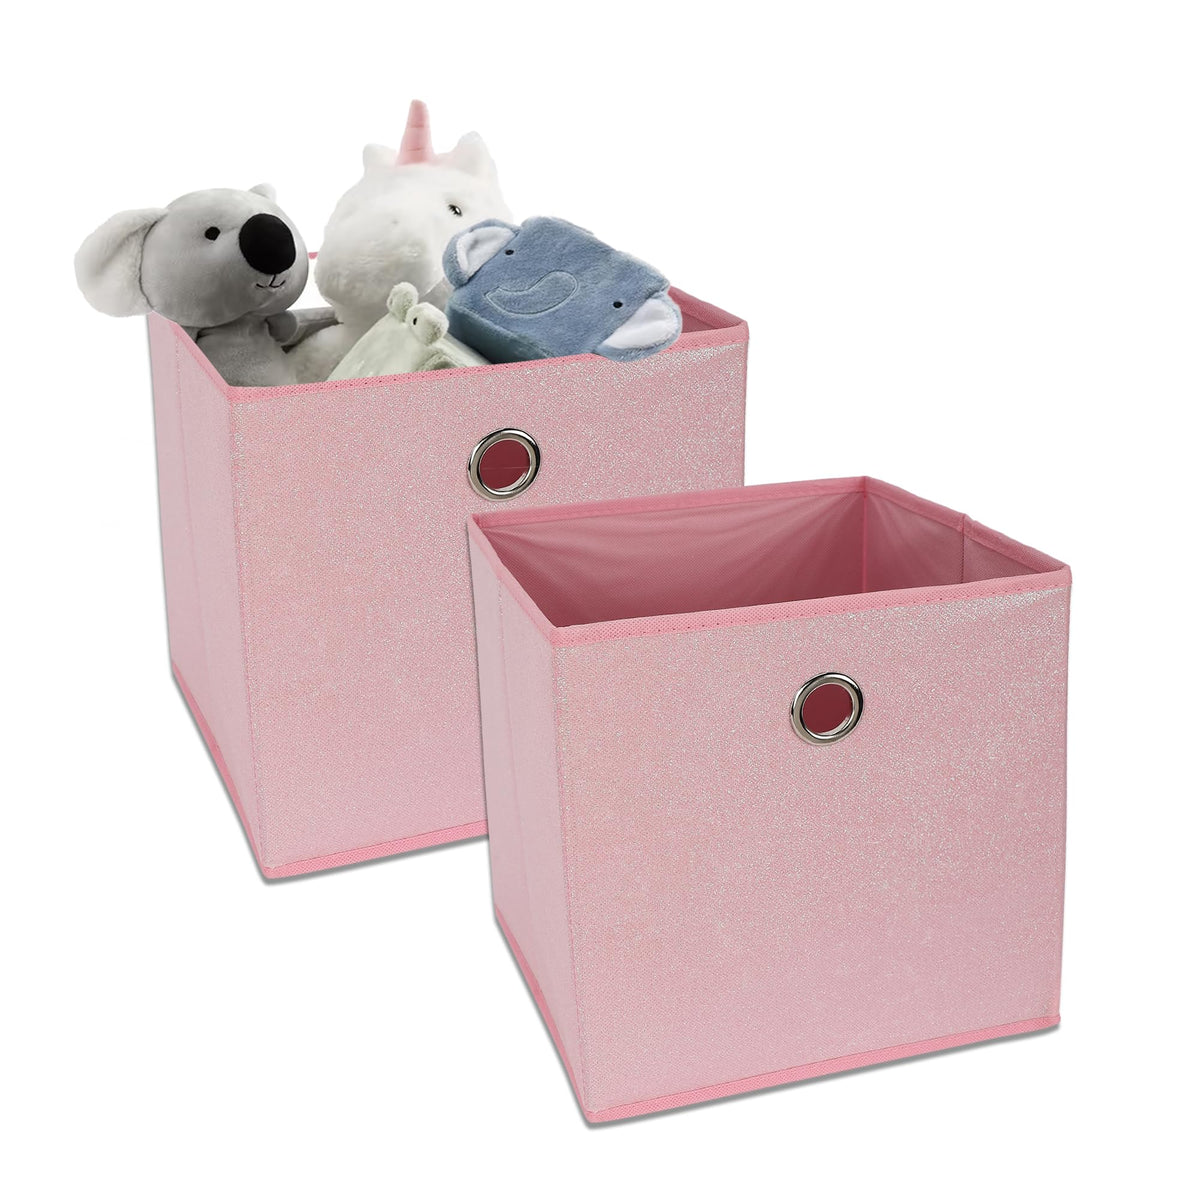 Anko Polyester Foldable Storage Box for Clothes, Books, Toys | Set of 2 | Sturdy, Durable Fabric with Strong Eyelets | Collapsible Organizer for Home, Office, Bedroom | Sparkle Pink | 10.6 inches